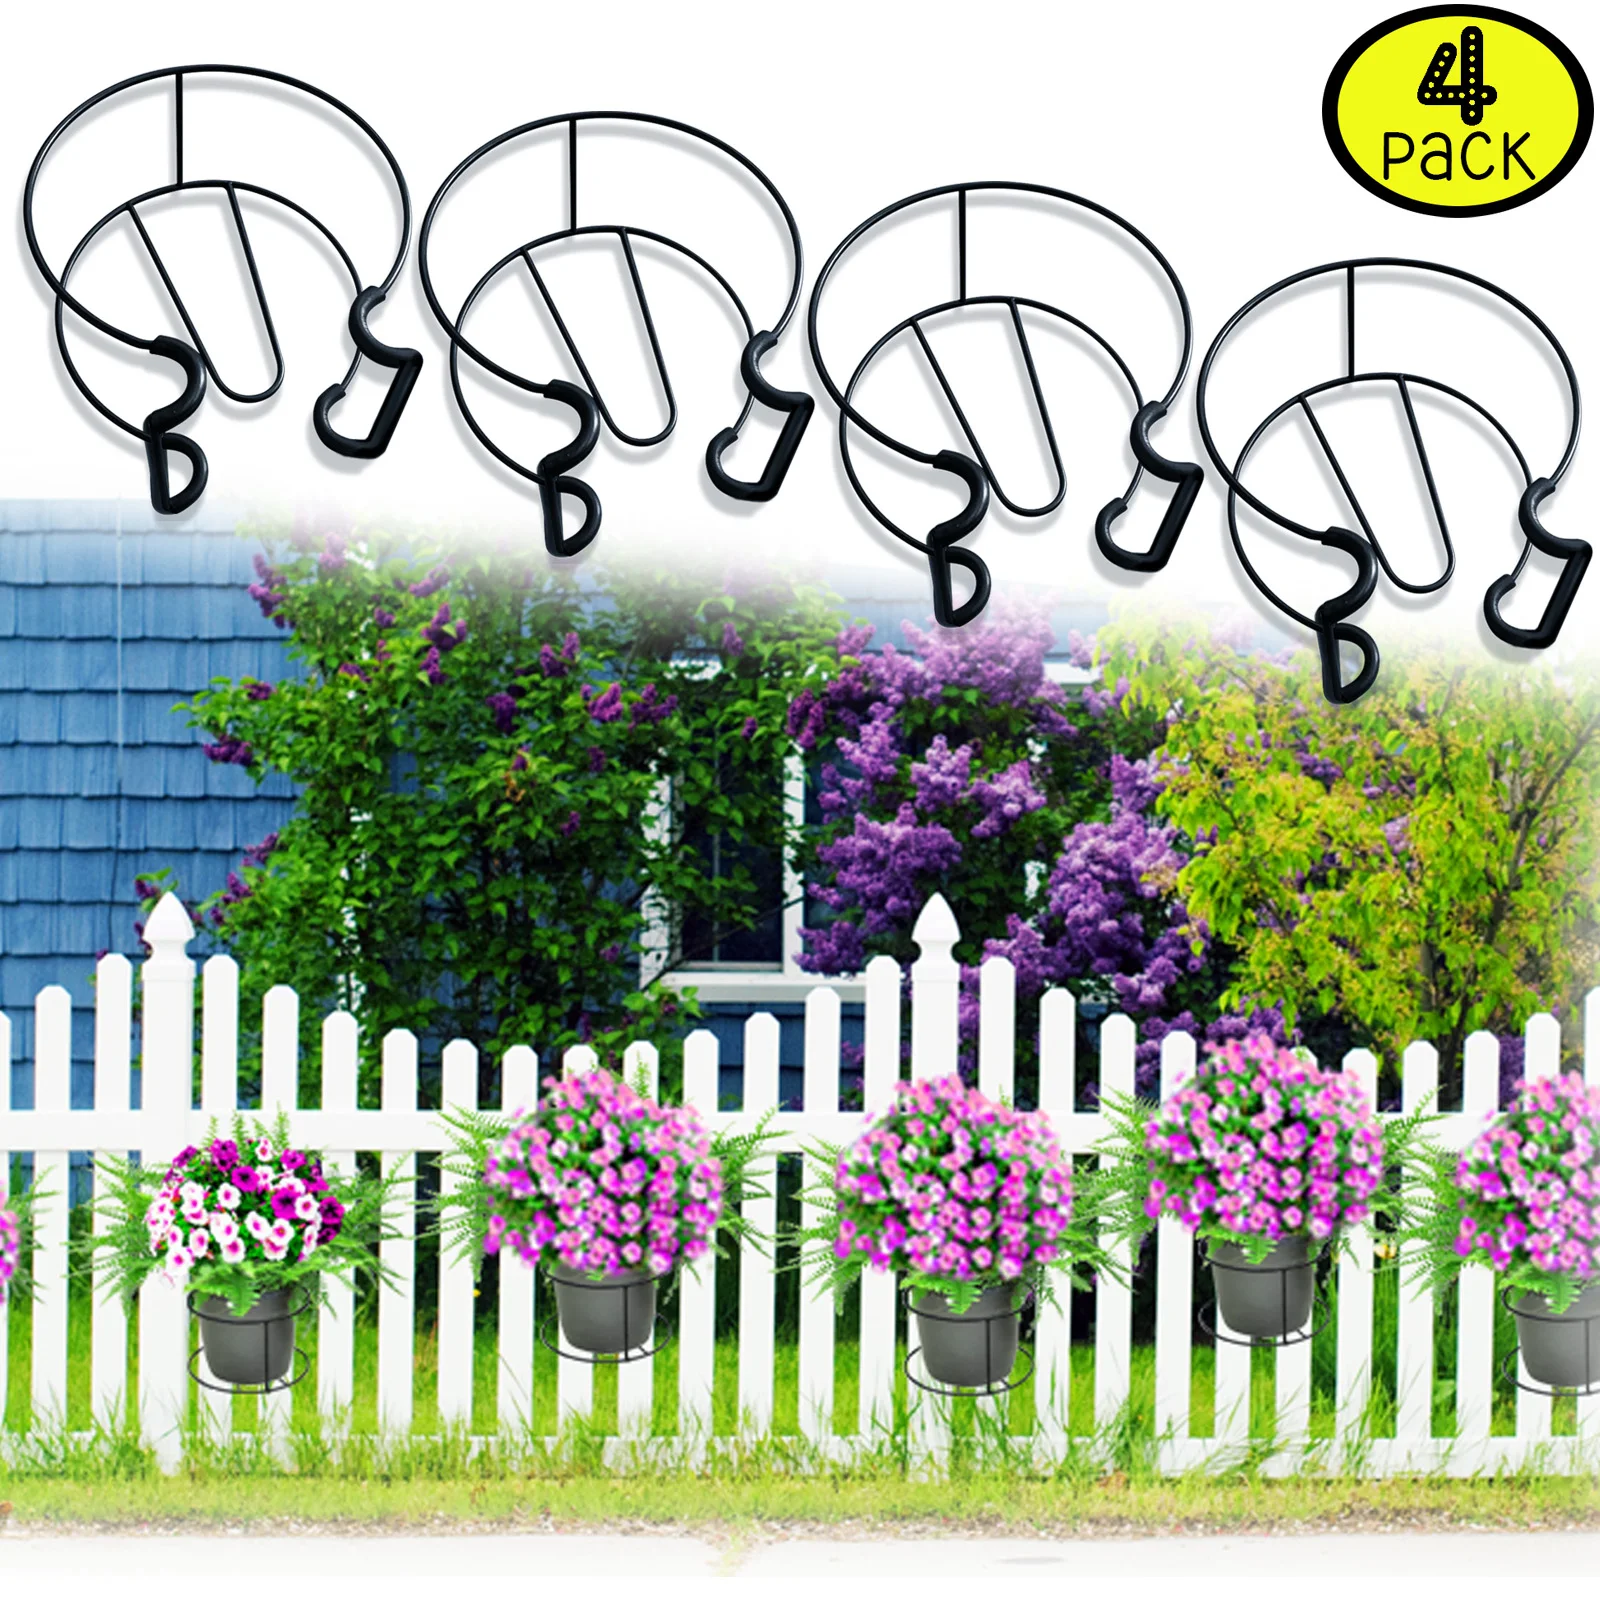 

4-Pack Iron Art Railing Planter Stand Holder Flower Pot Basket for Balcony Fence Stair Railing Bonsai Stand Decoration